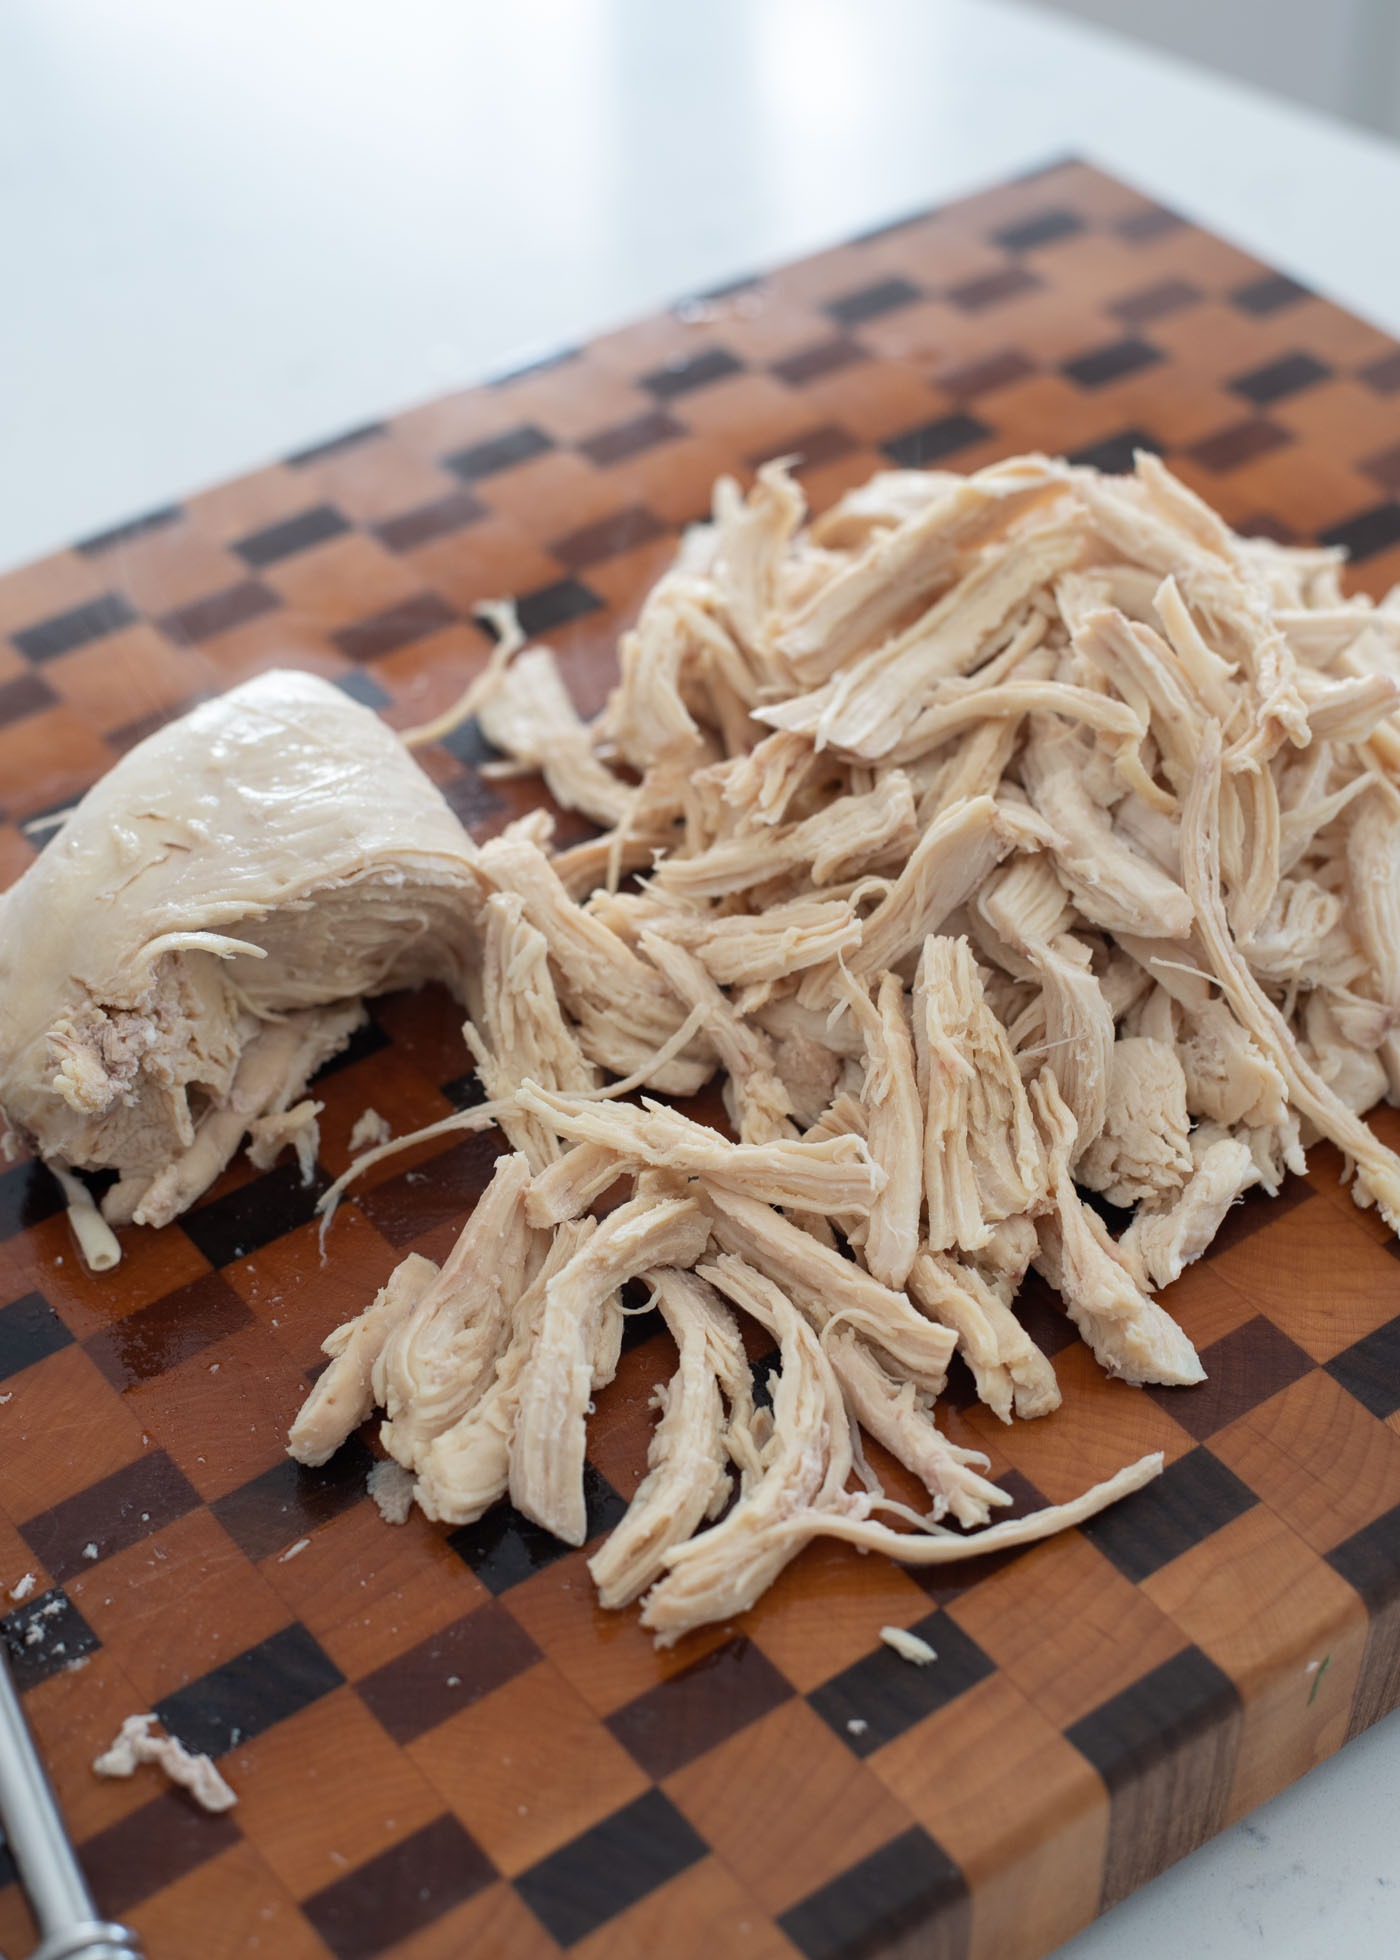 Poached chicken breasts are being shredded on a cutting board.